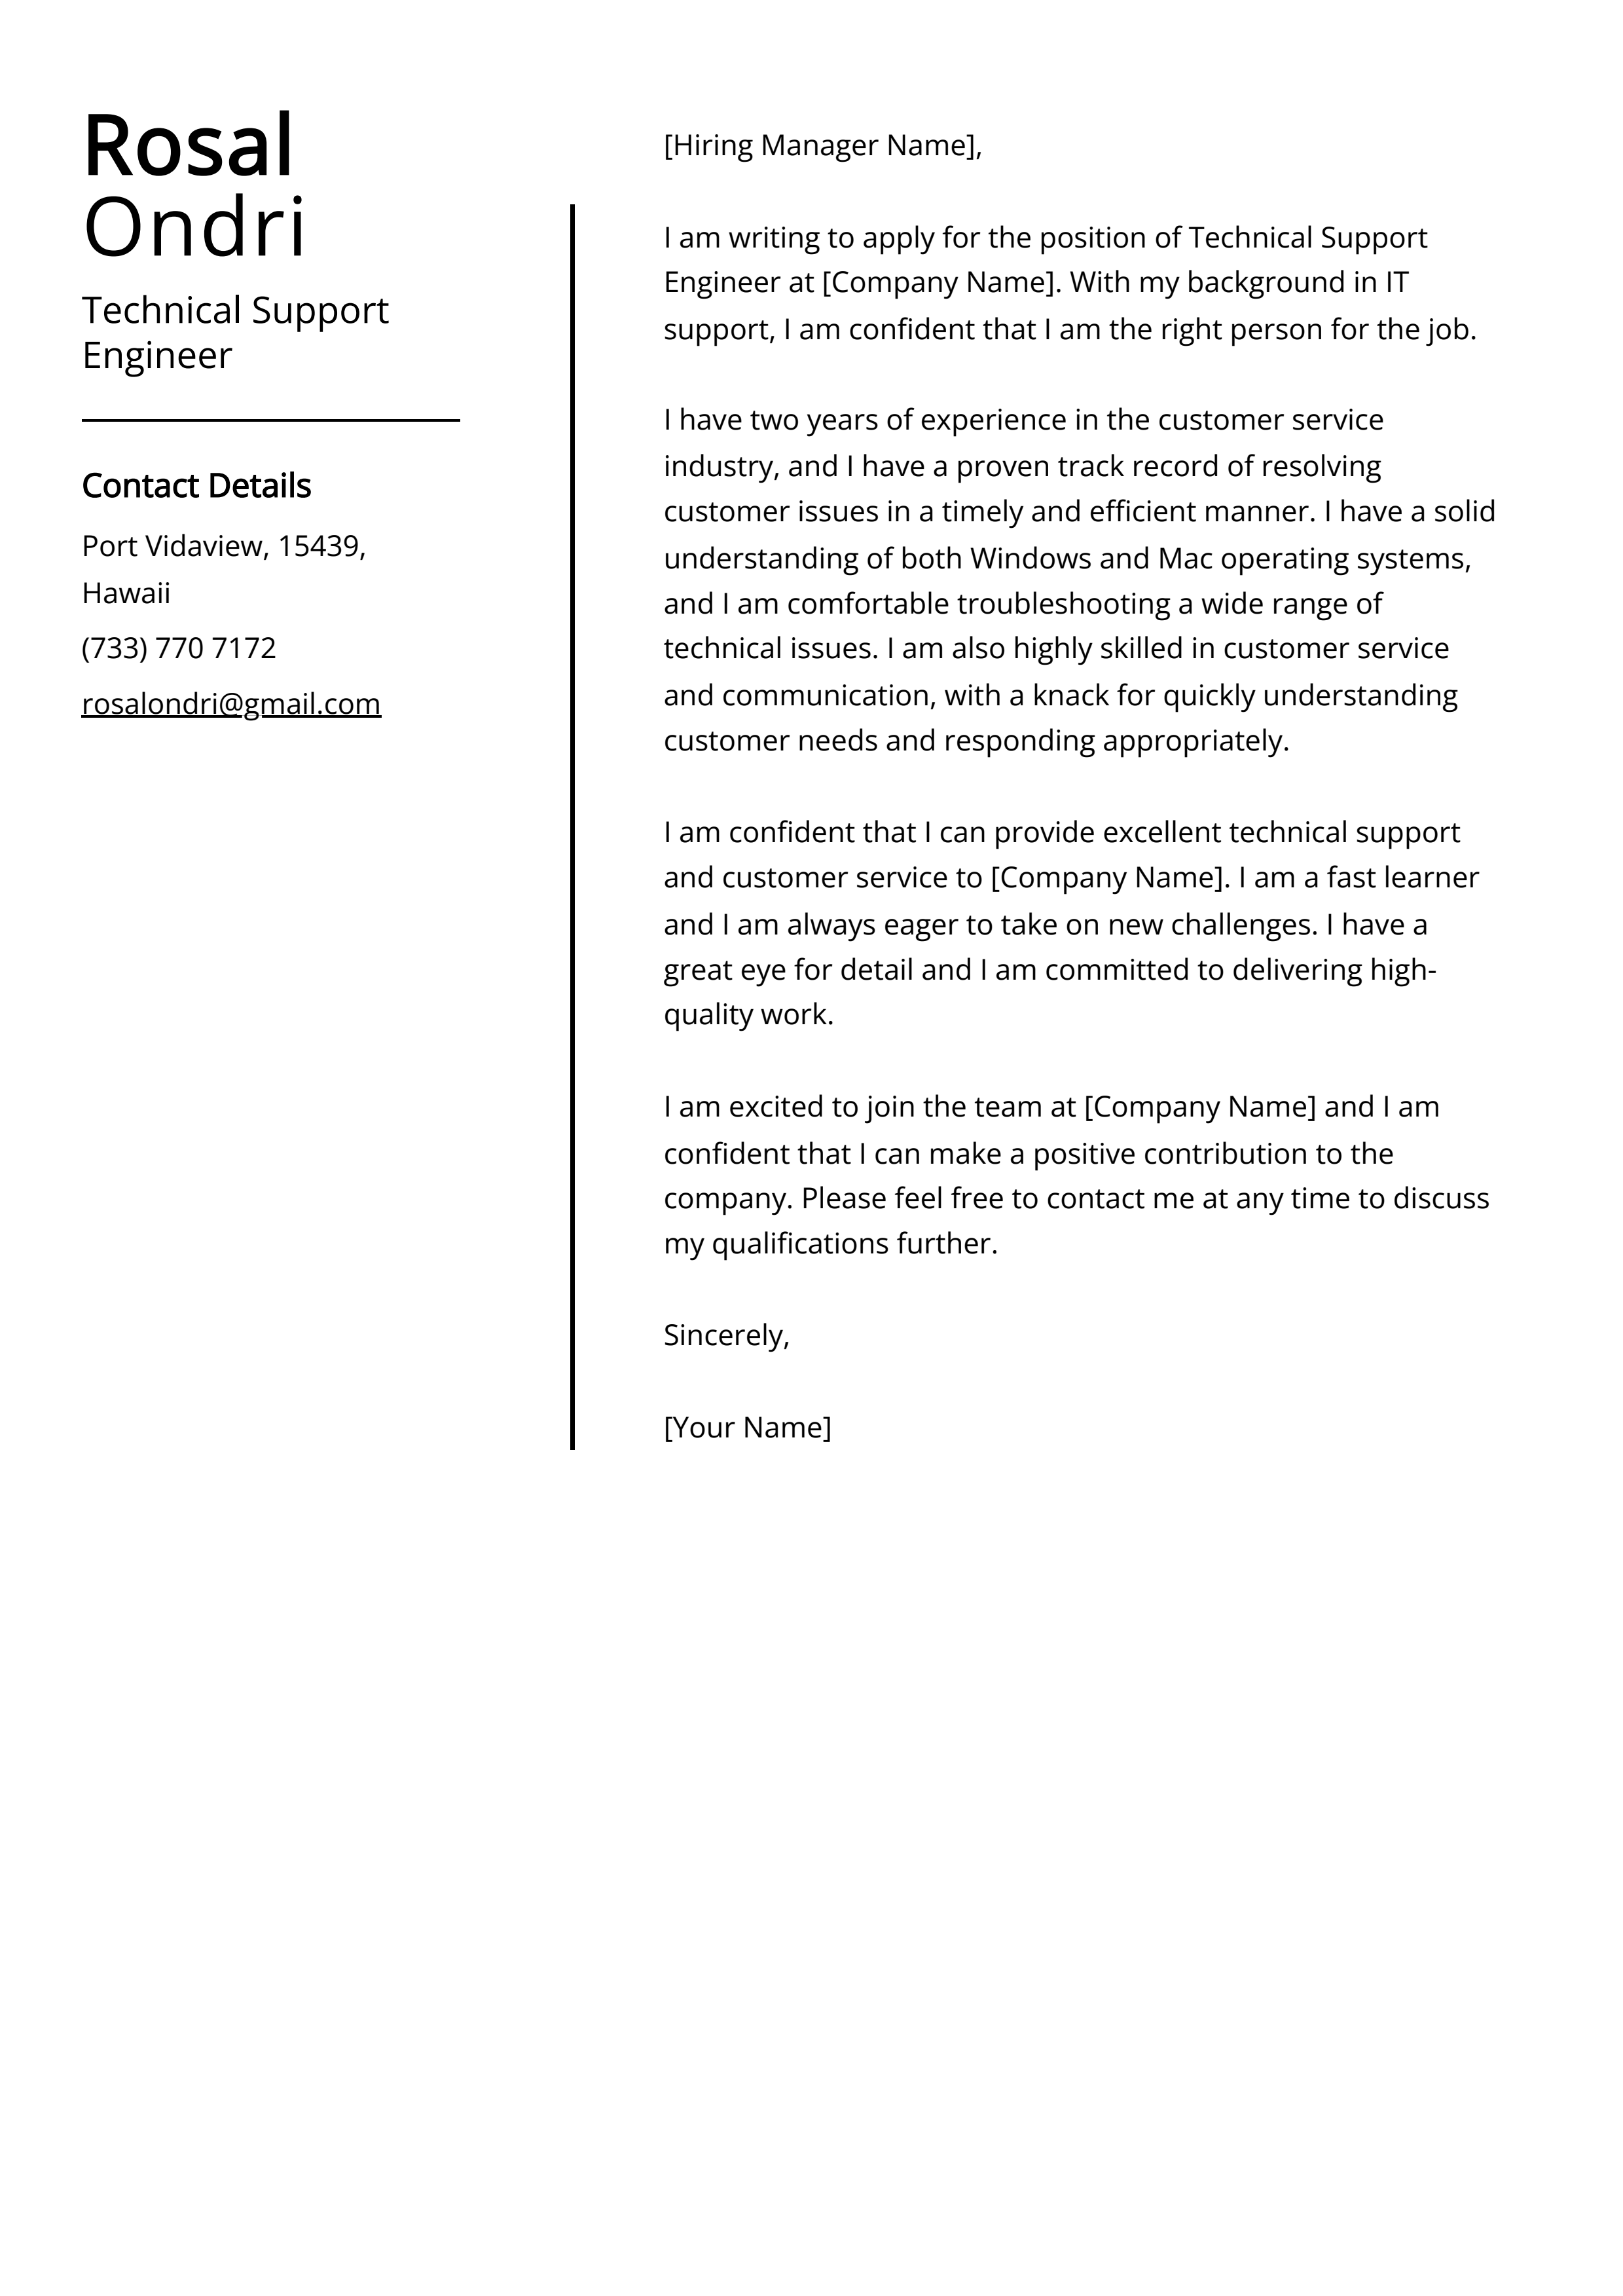 Technical Support Engineer Cover Letter Example